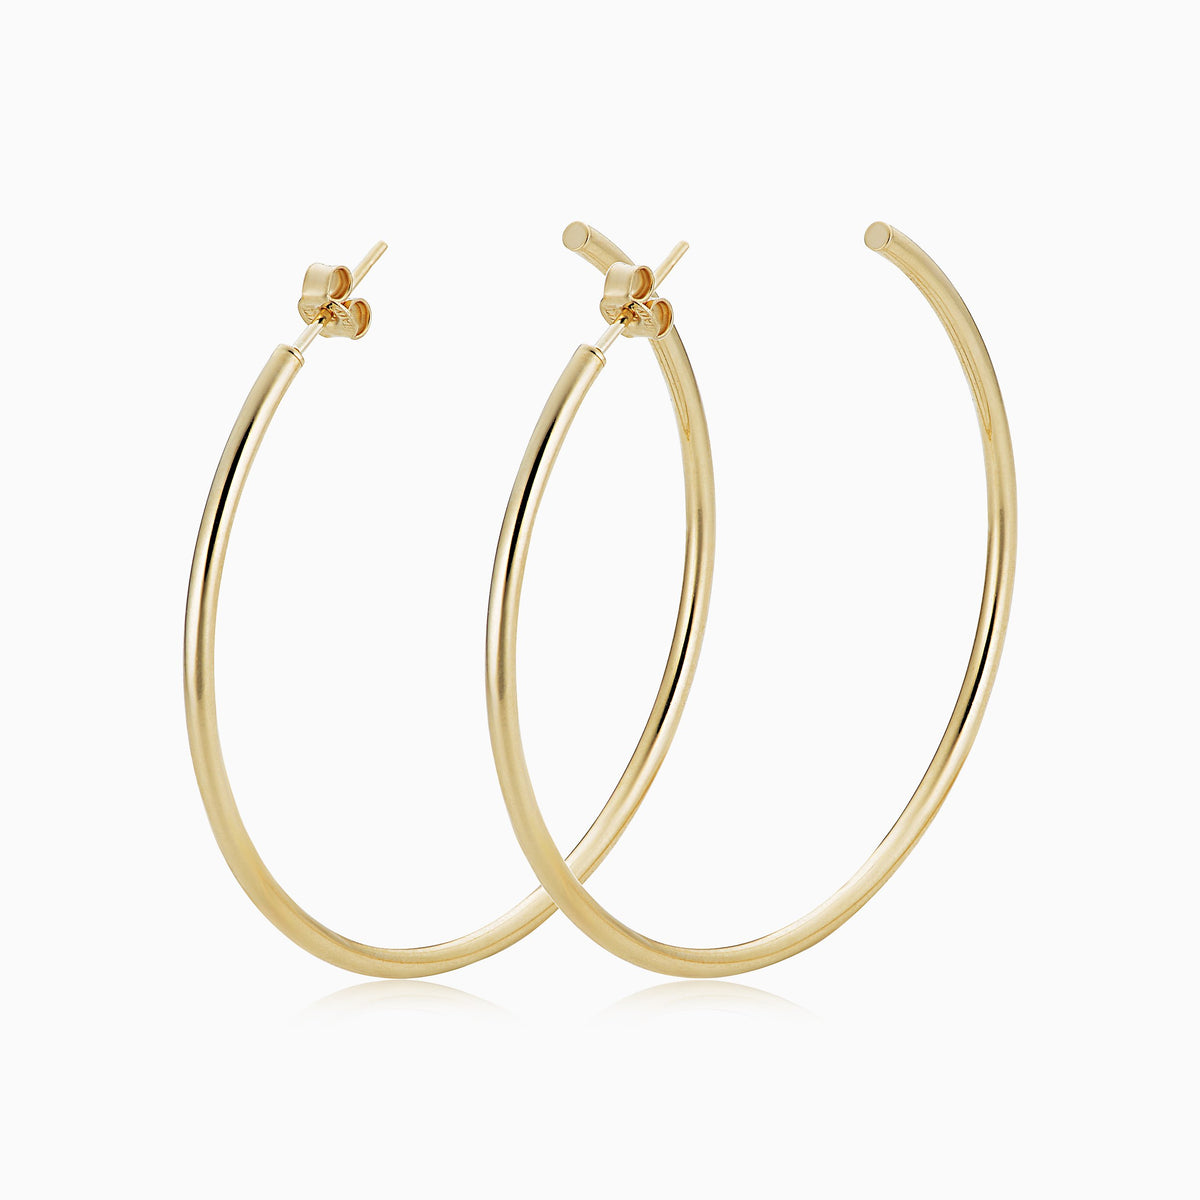 Oradina Women's 14K Yellow Gold Silicone Hold Me Tight Earring Backs - Yellow Gold One-Size